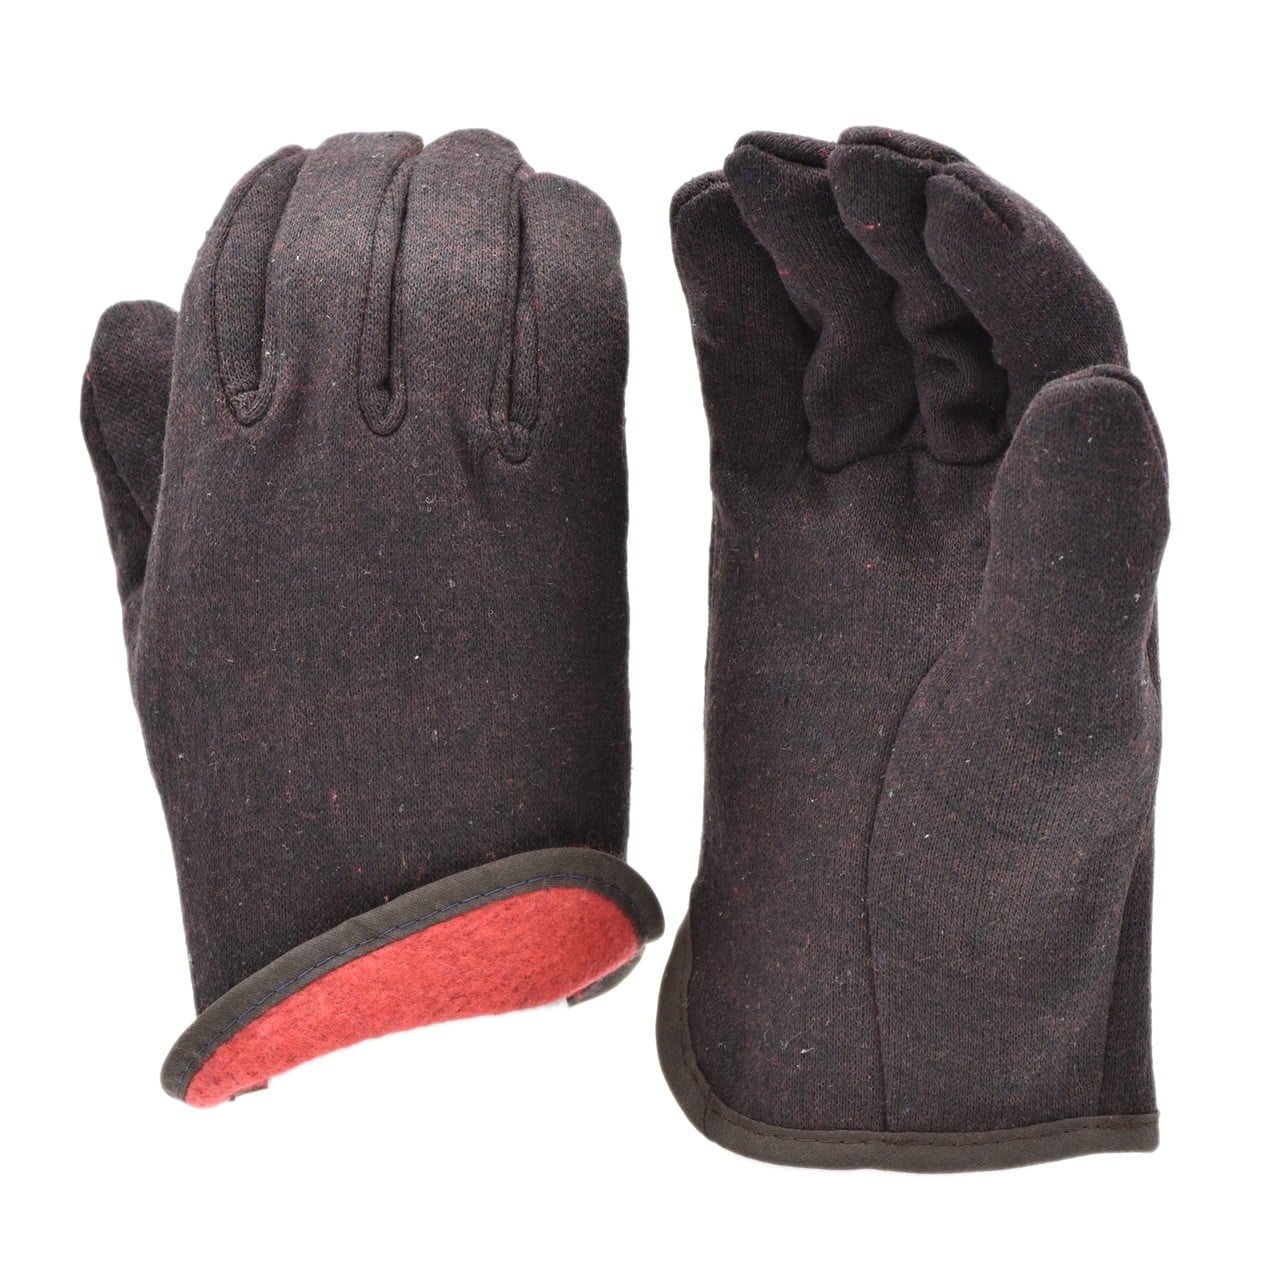 G & F Products Jersey Work Gloves Durable & Safe, Fleece Lining, 144 ...